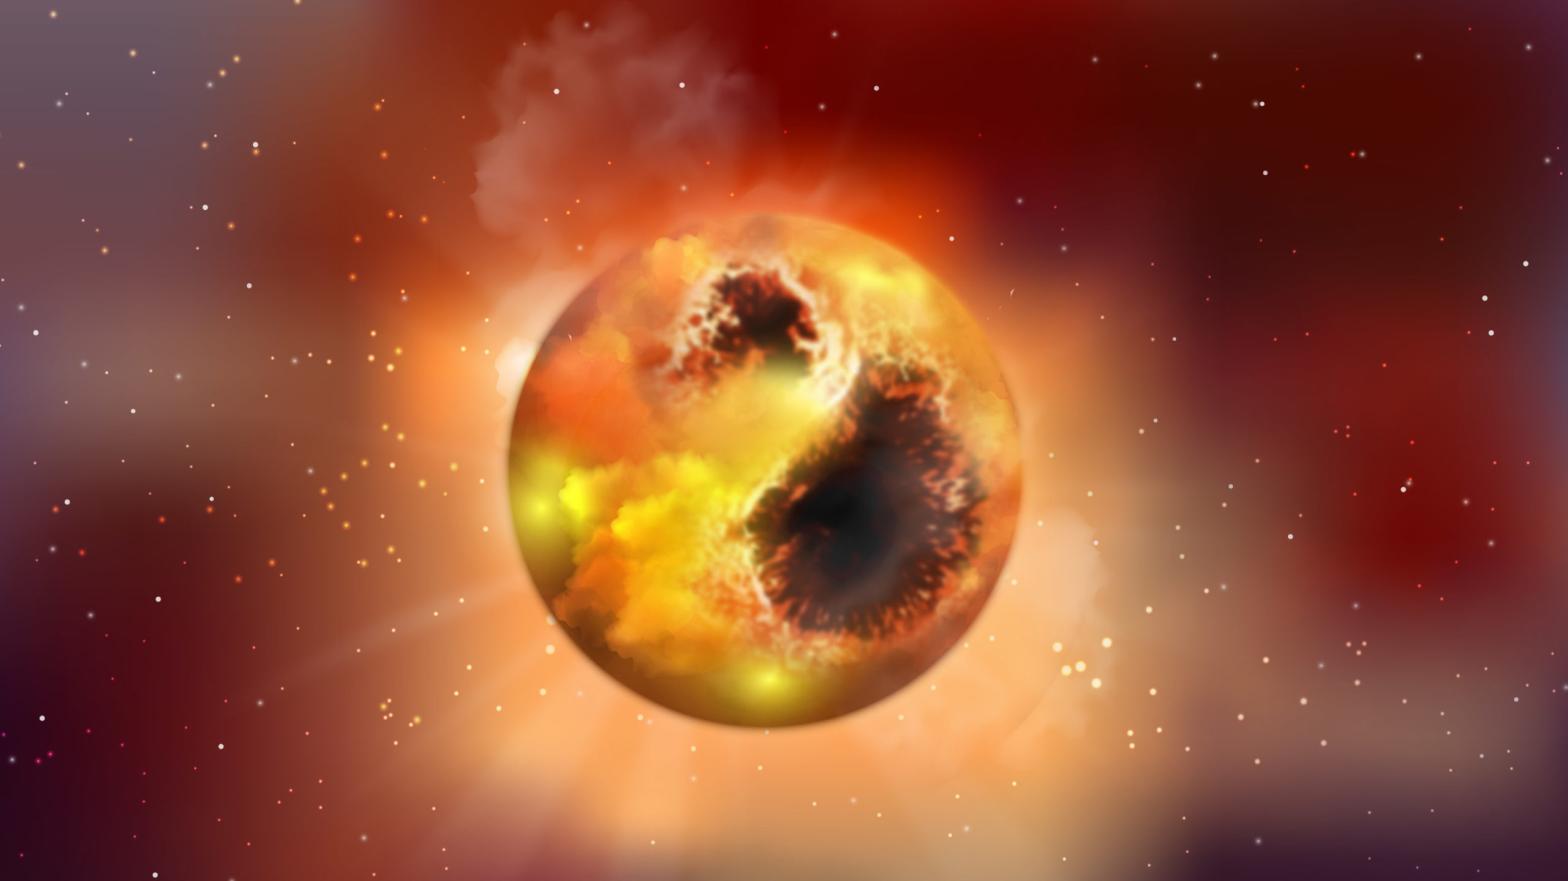 Artistic conception of Betelgeuse and its hypothesised surface blemishes. (Image: MPIA graphics department)